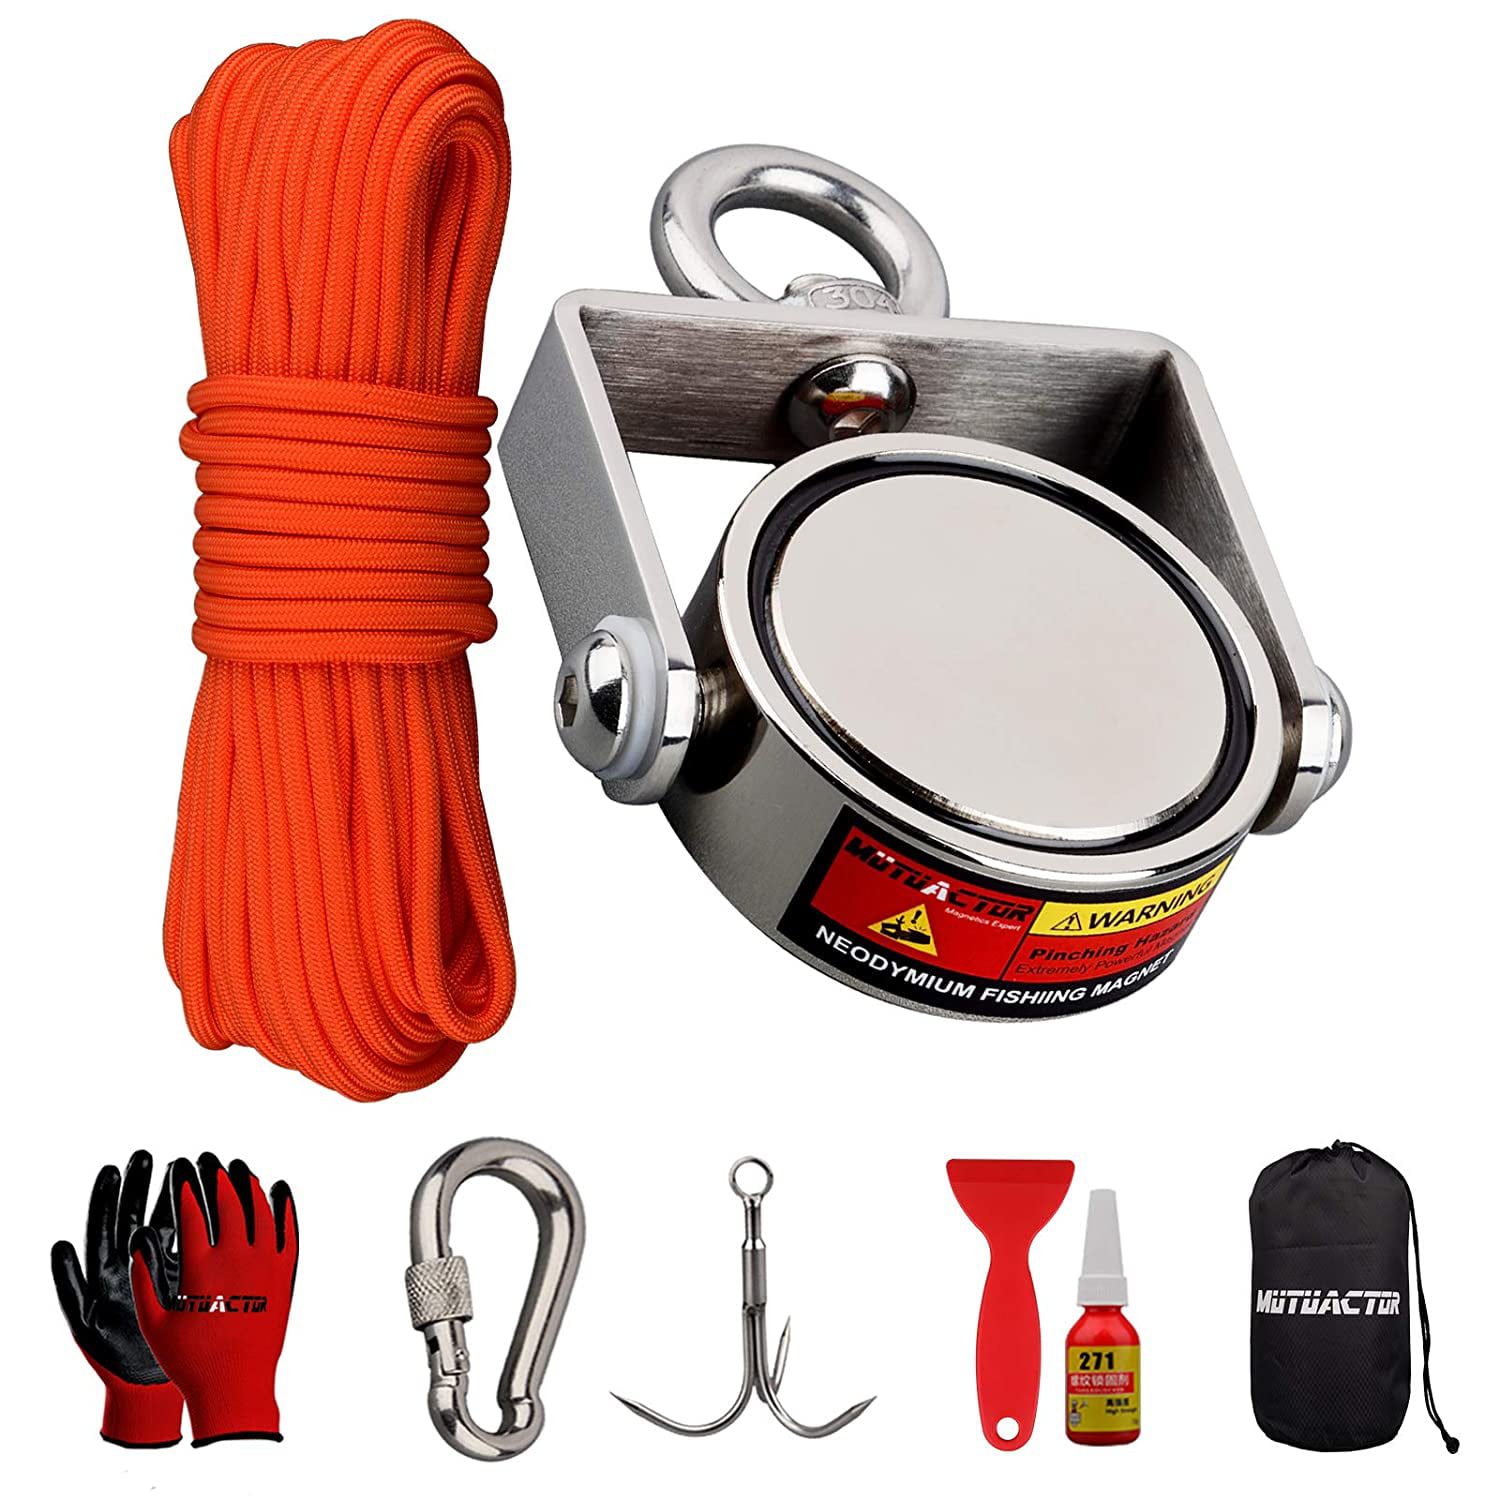 Anti-Slip Gloves 2 Steel Carabiners Waterproof Bag Fishing Magnet Kit 65 ft Durable Nylon Rope Cleaning Cloth Fishing Magnets with Rope Kit All-in-One Magnet Fishing Kit.Strong Magnet 